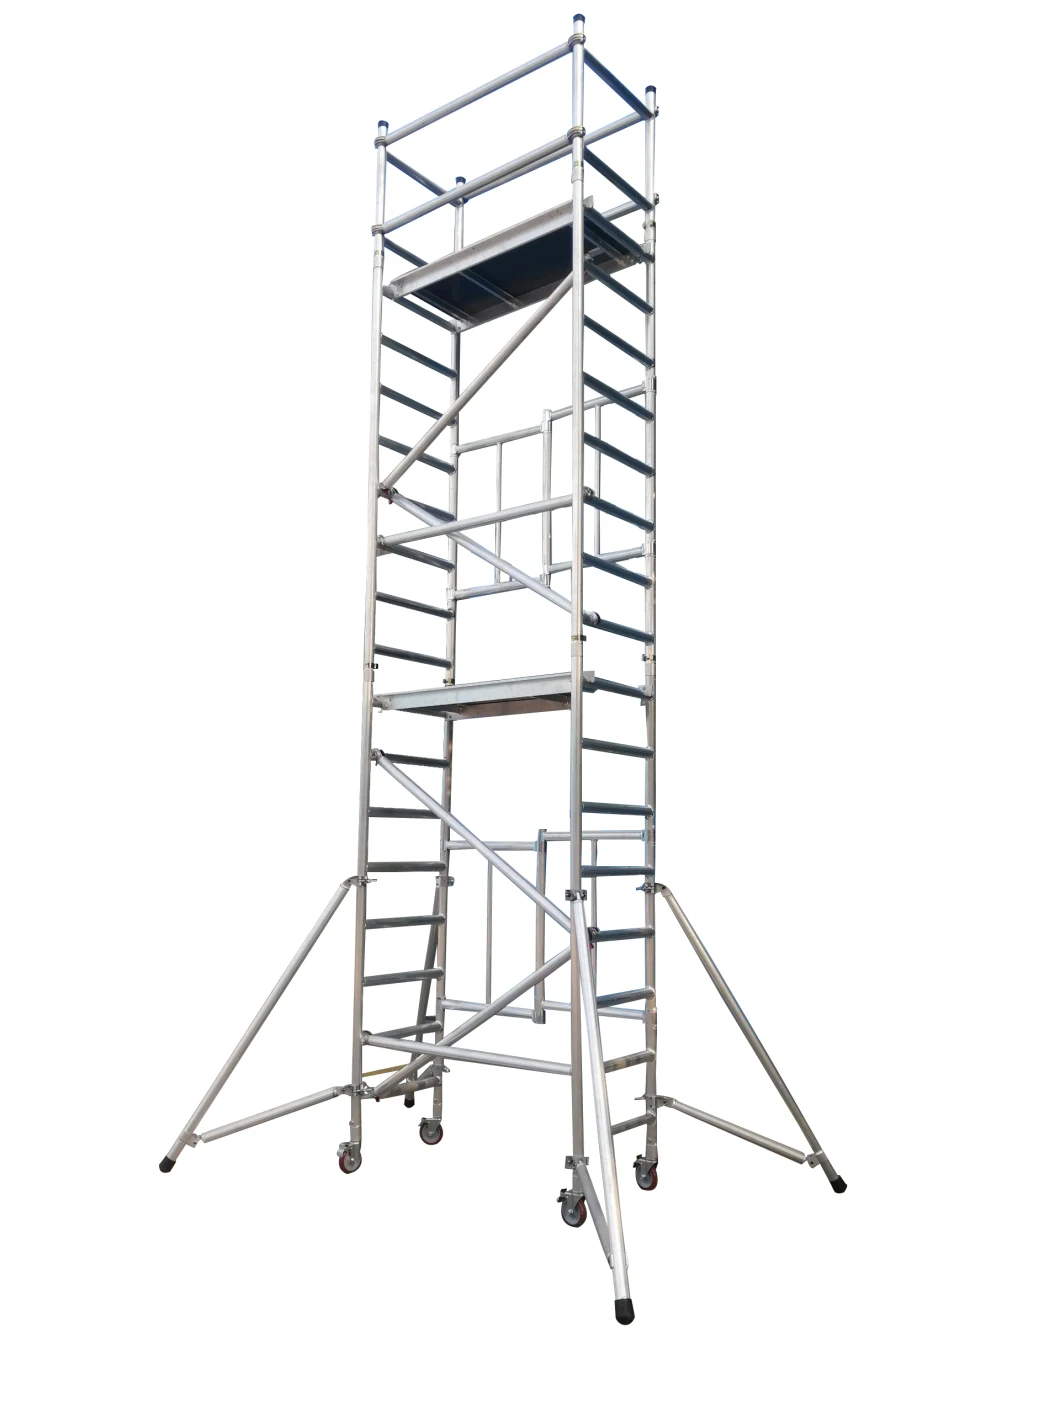 Dragonstage China Hot Sale Portable Mobile Aluminium Folding Scaffolding for Work